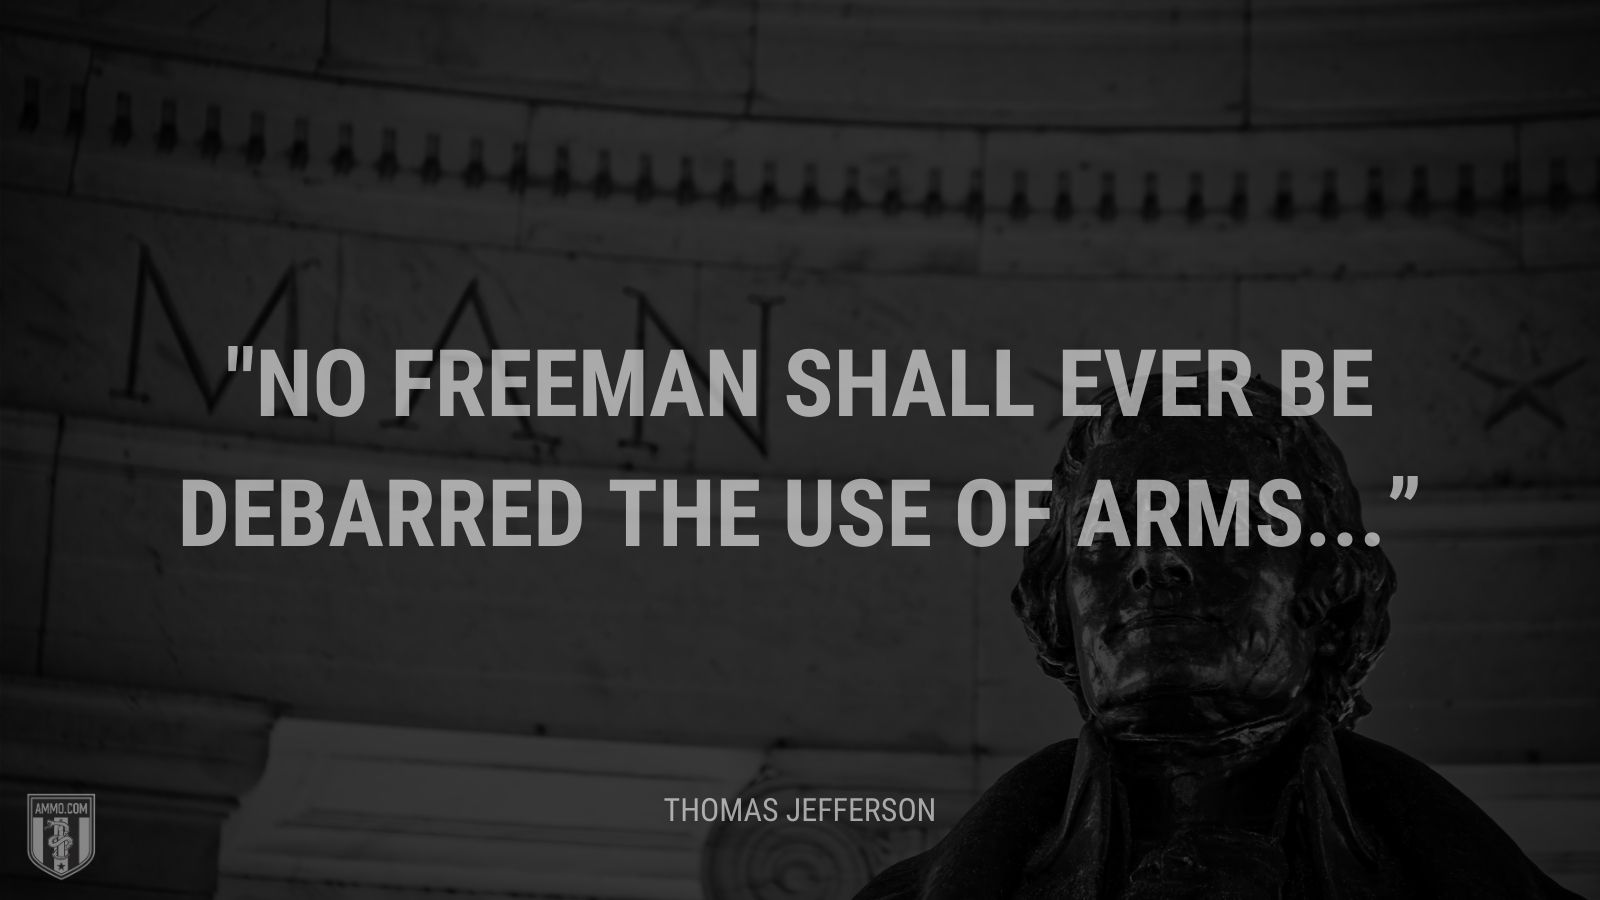 “No freeman shall ever be debarred the use of arms...” - Thomas Jefferson